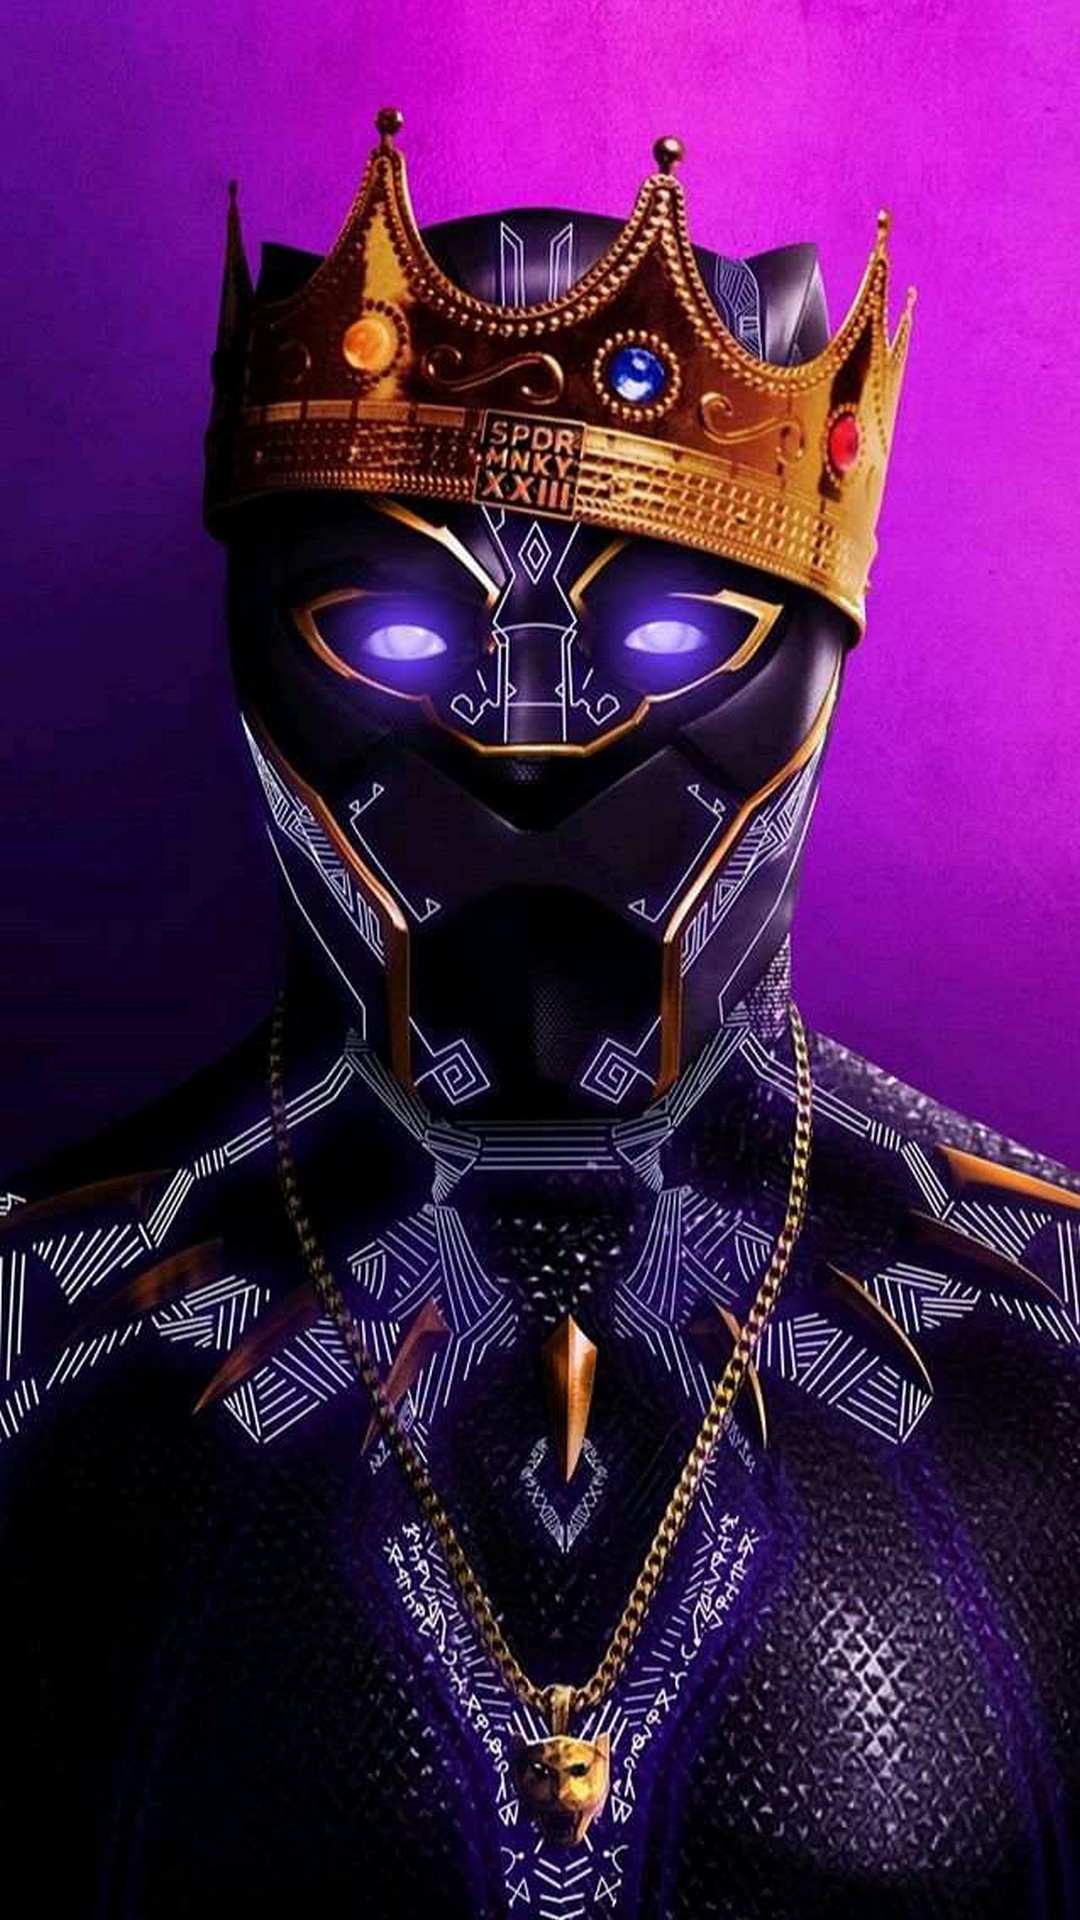 Black Panther Wallpaper For Android With high-resolution 1080X1920 pixel. You can use this wallpaper for your Android backgrounds, Tablet, Samsung Screensavers, Mobile Phone Lock Screen and another Smartphones device